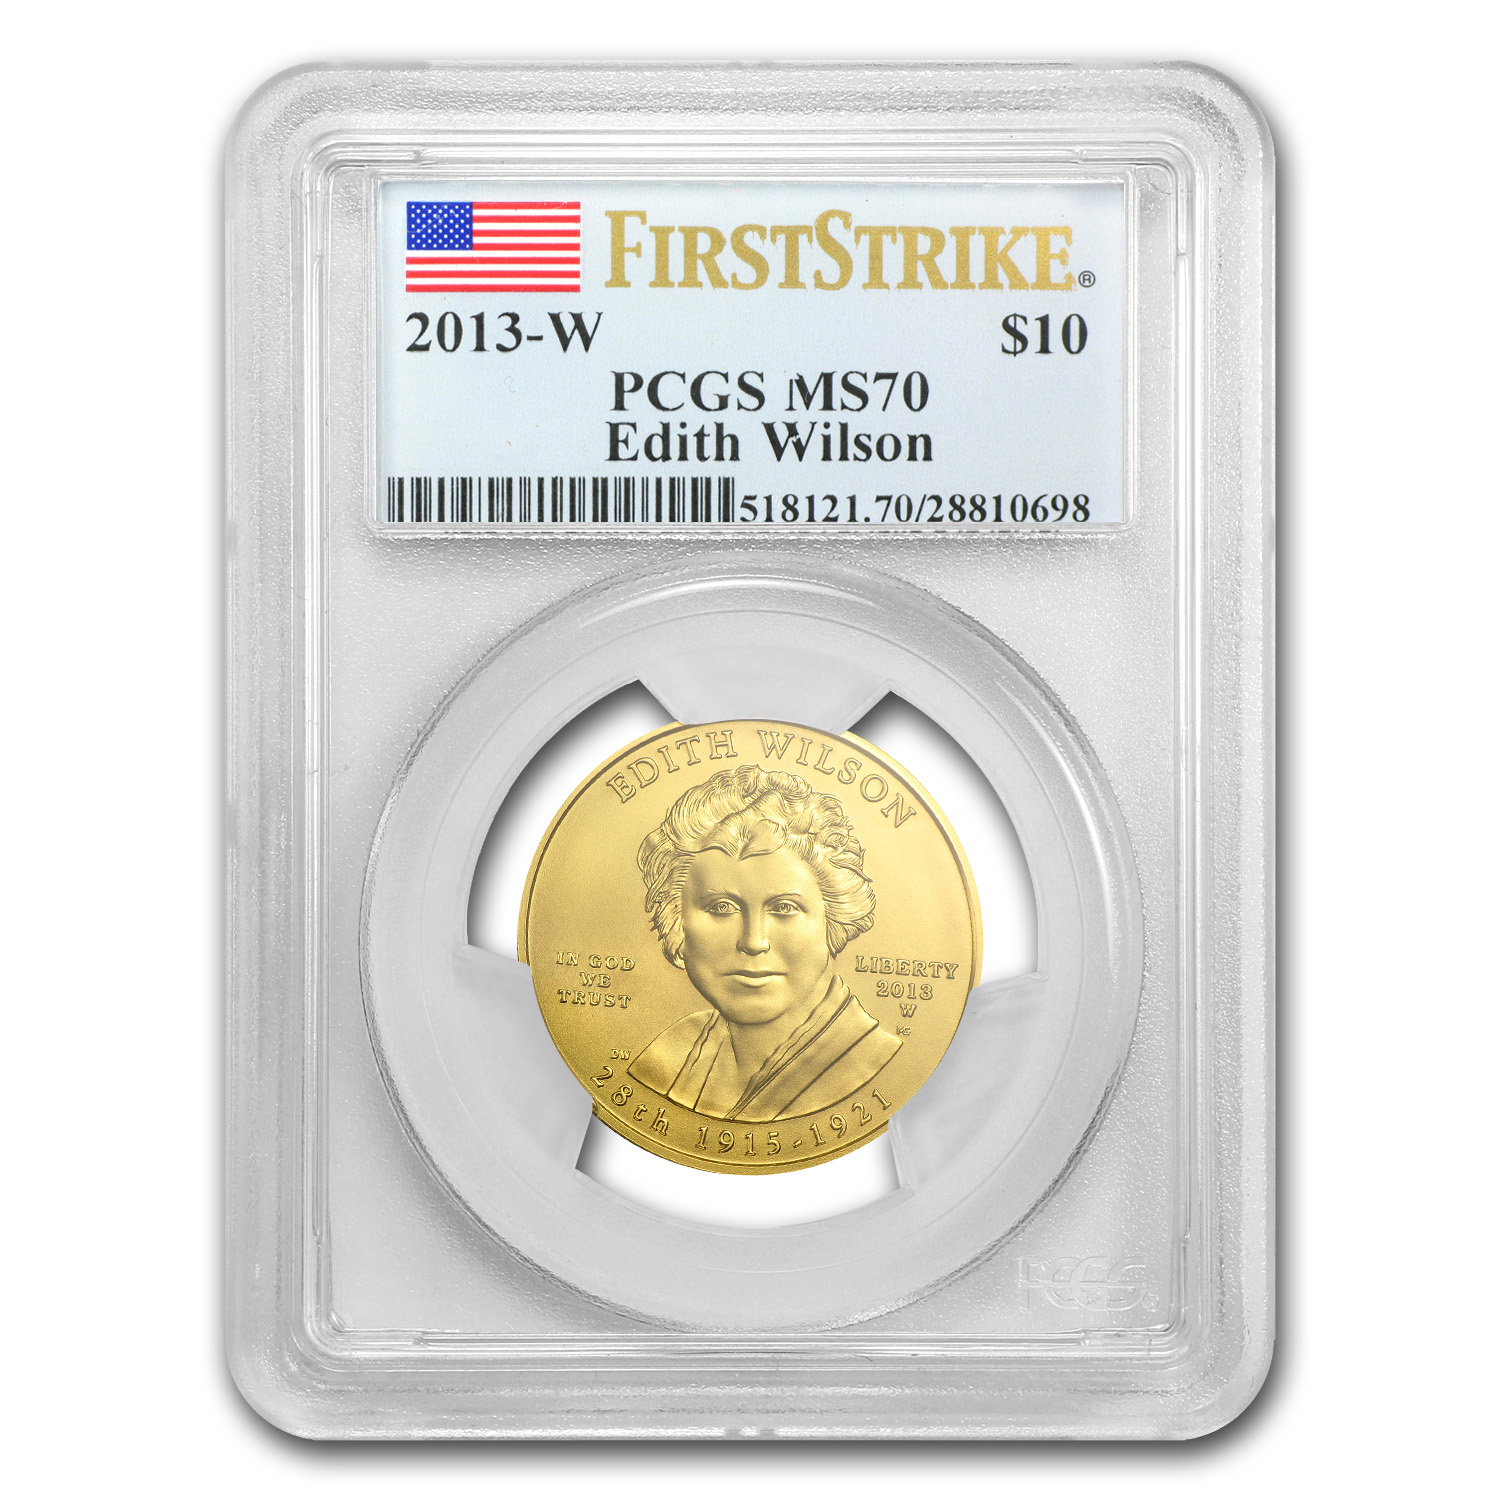 Buy 2013-W 1/2 oz Gold Edith Wilson MS-70 PCGS (FirstStrike?) - Click Image to Close